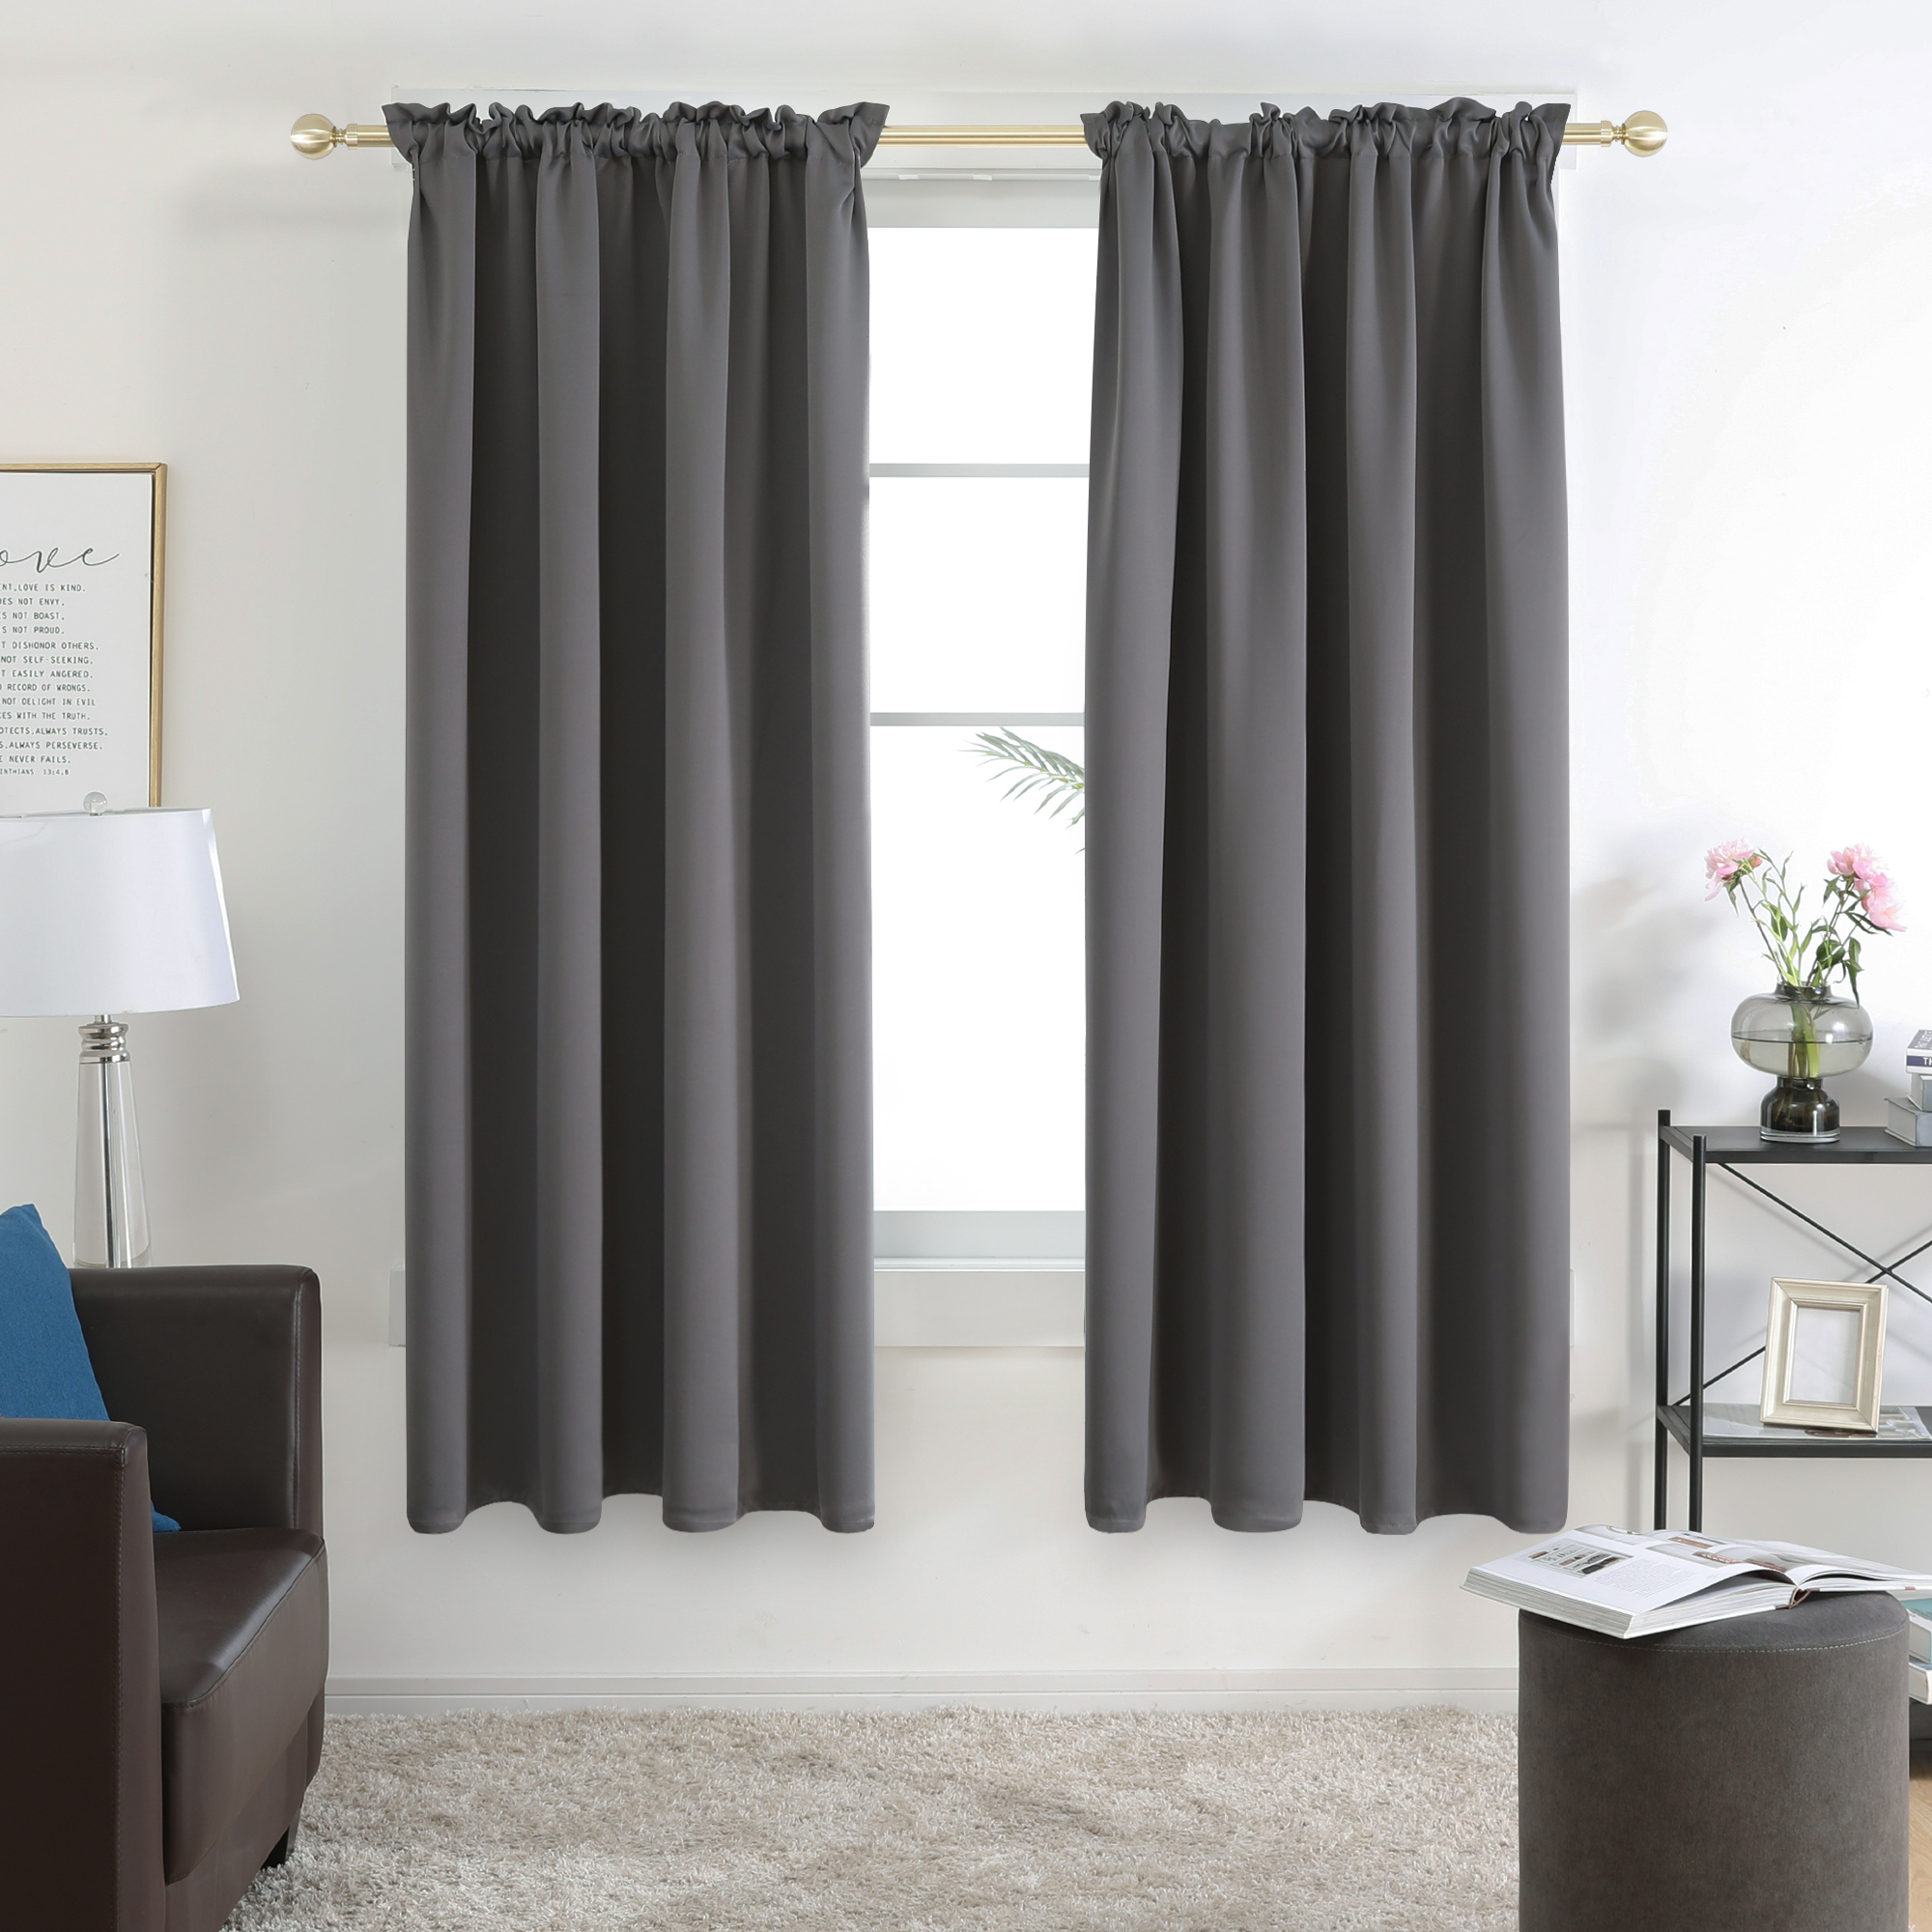 Deconovo 52 Inches Wide Rod Pocket Solid Blackout Curtains 2 Panels -$8.55~$11.85 + Free Shipping w/ Prime or orders $25+